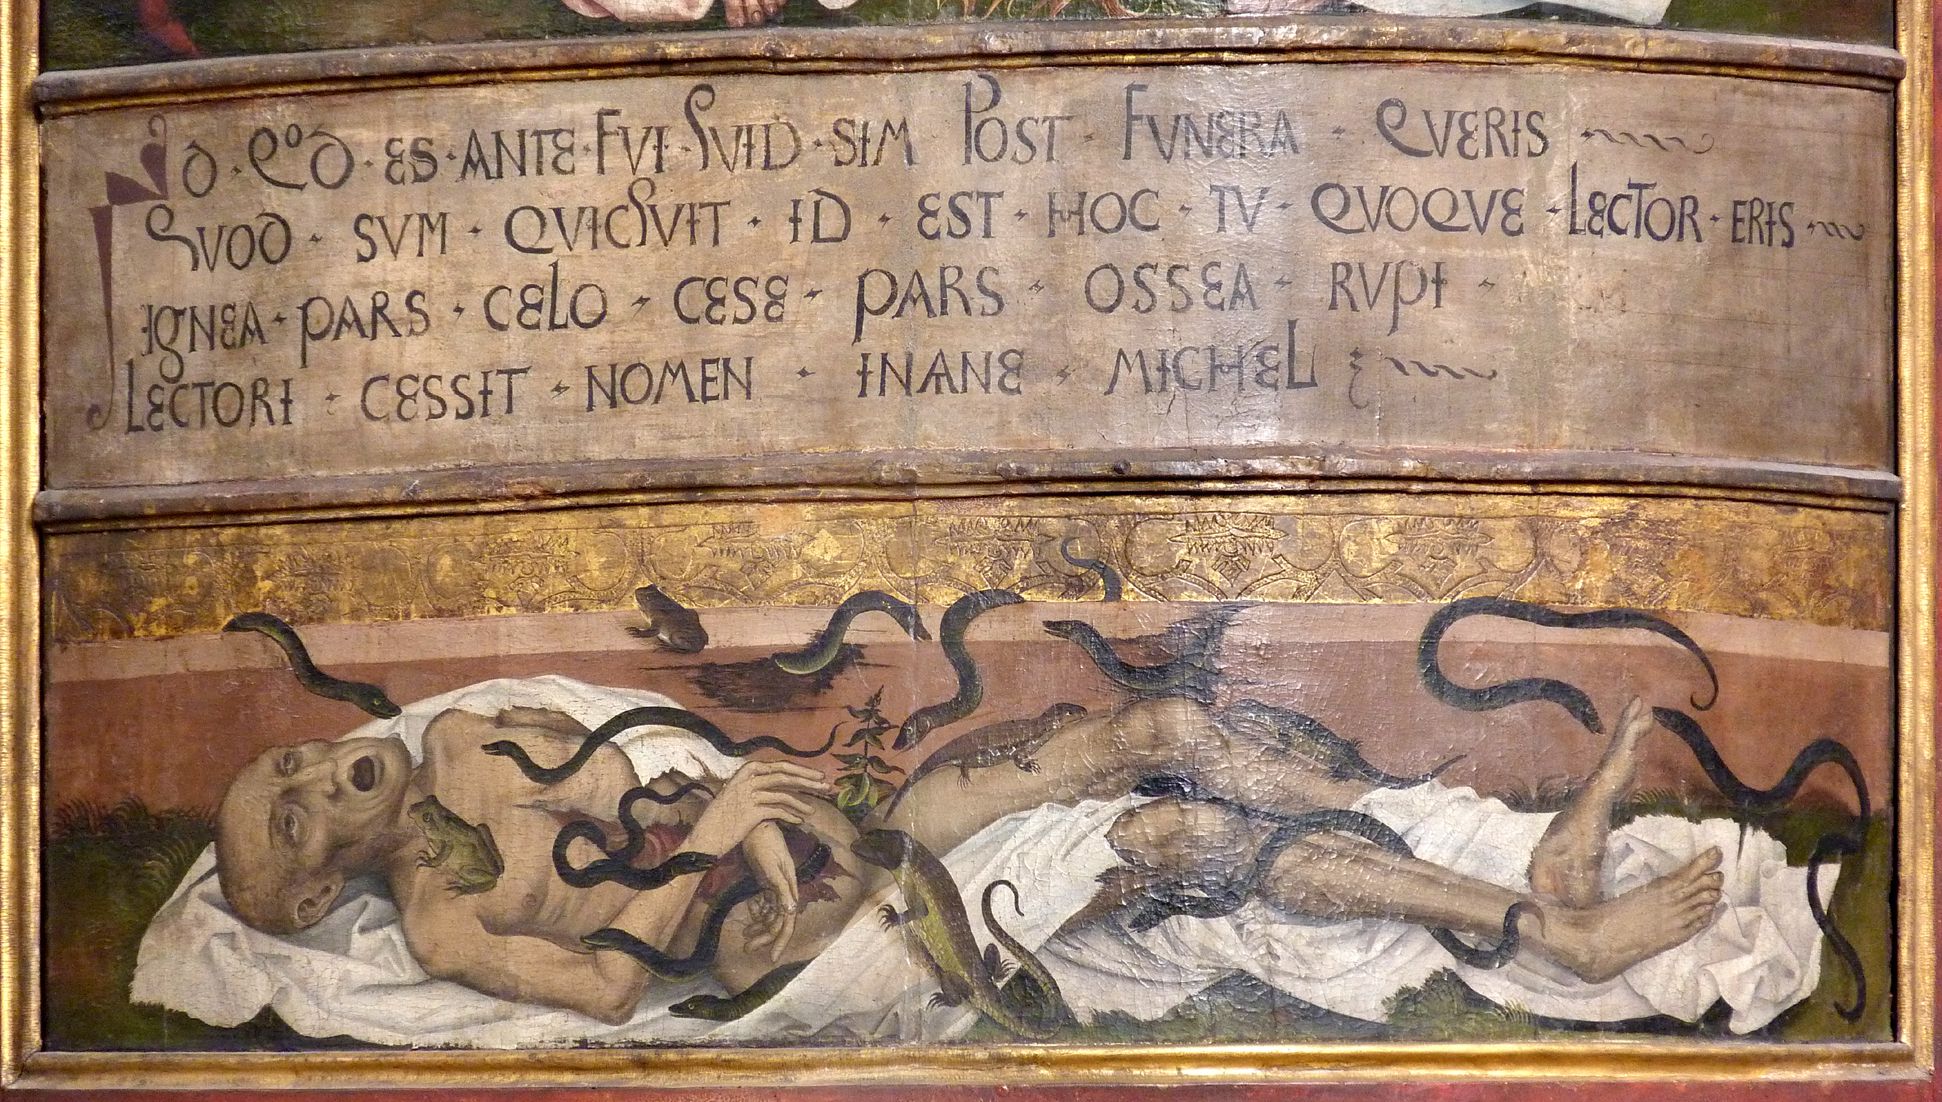 Epitaph for the Royal Chef de Cuisine Michael Raffael from Gorizia Inscription and dead body being eaten by worms